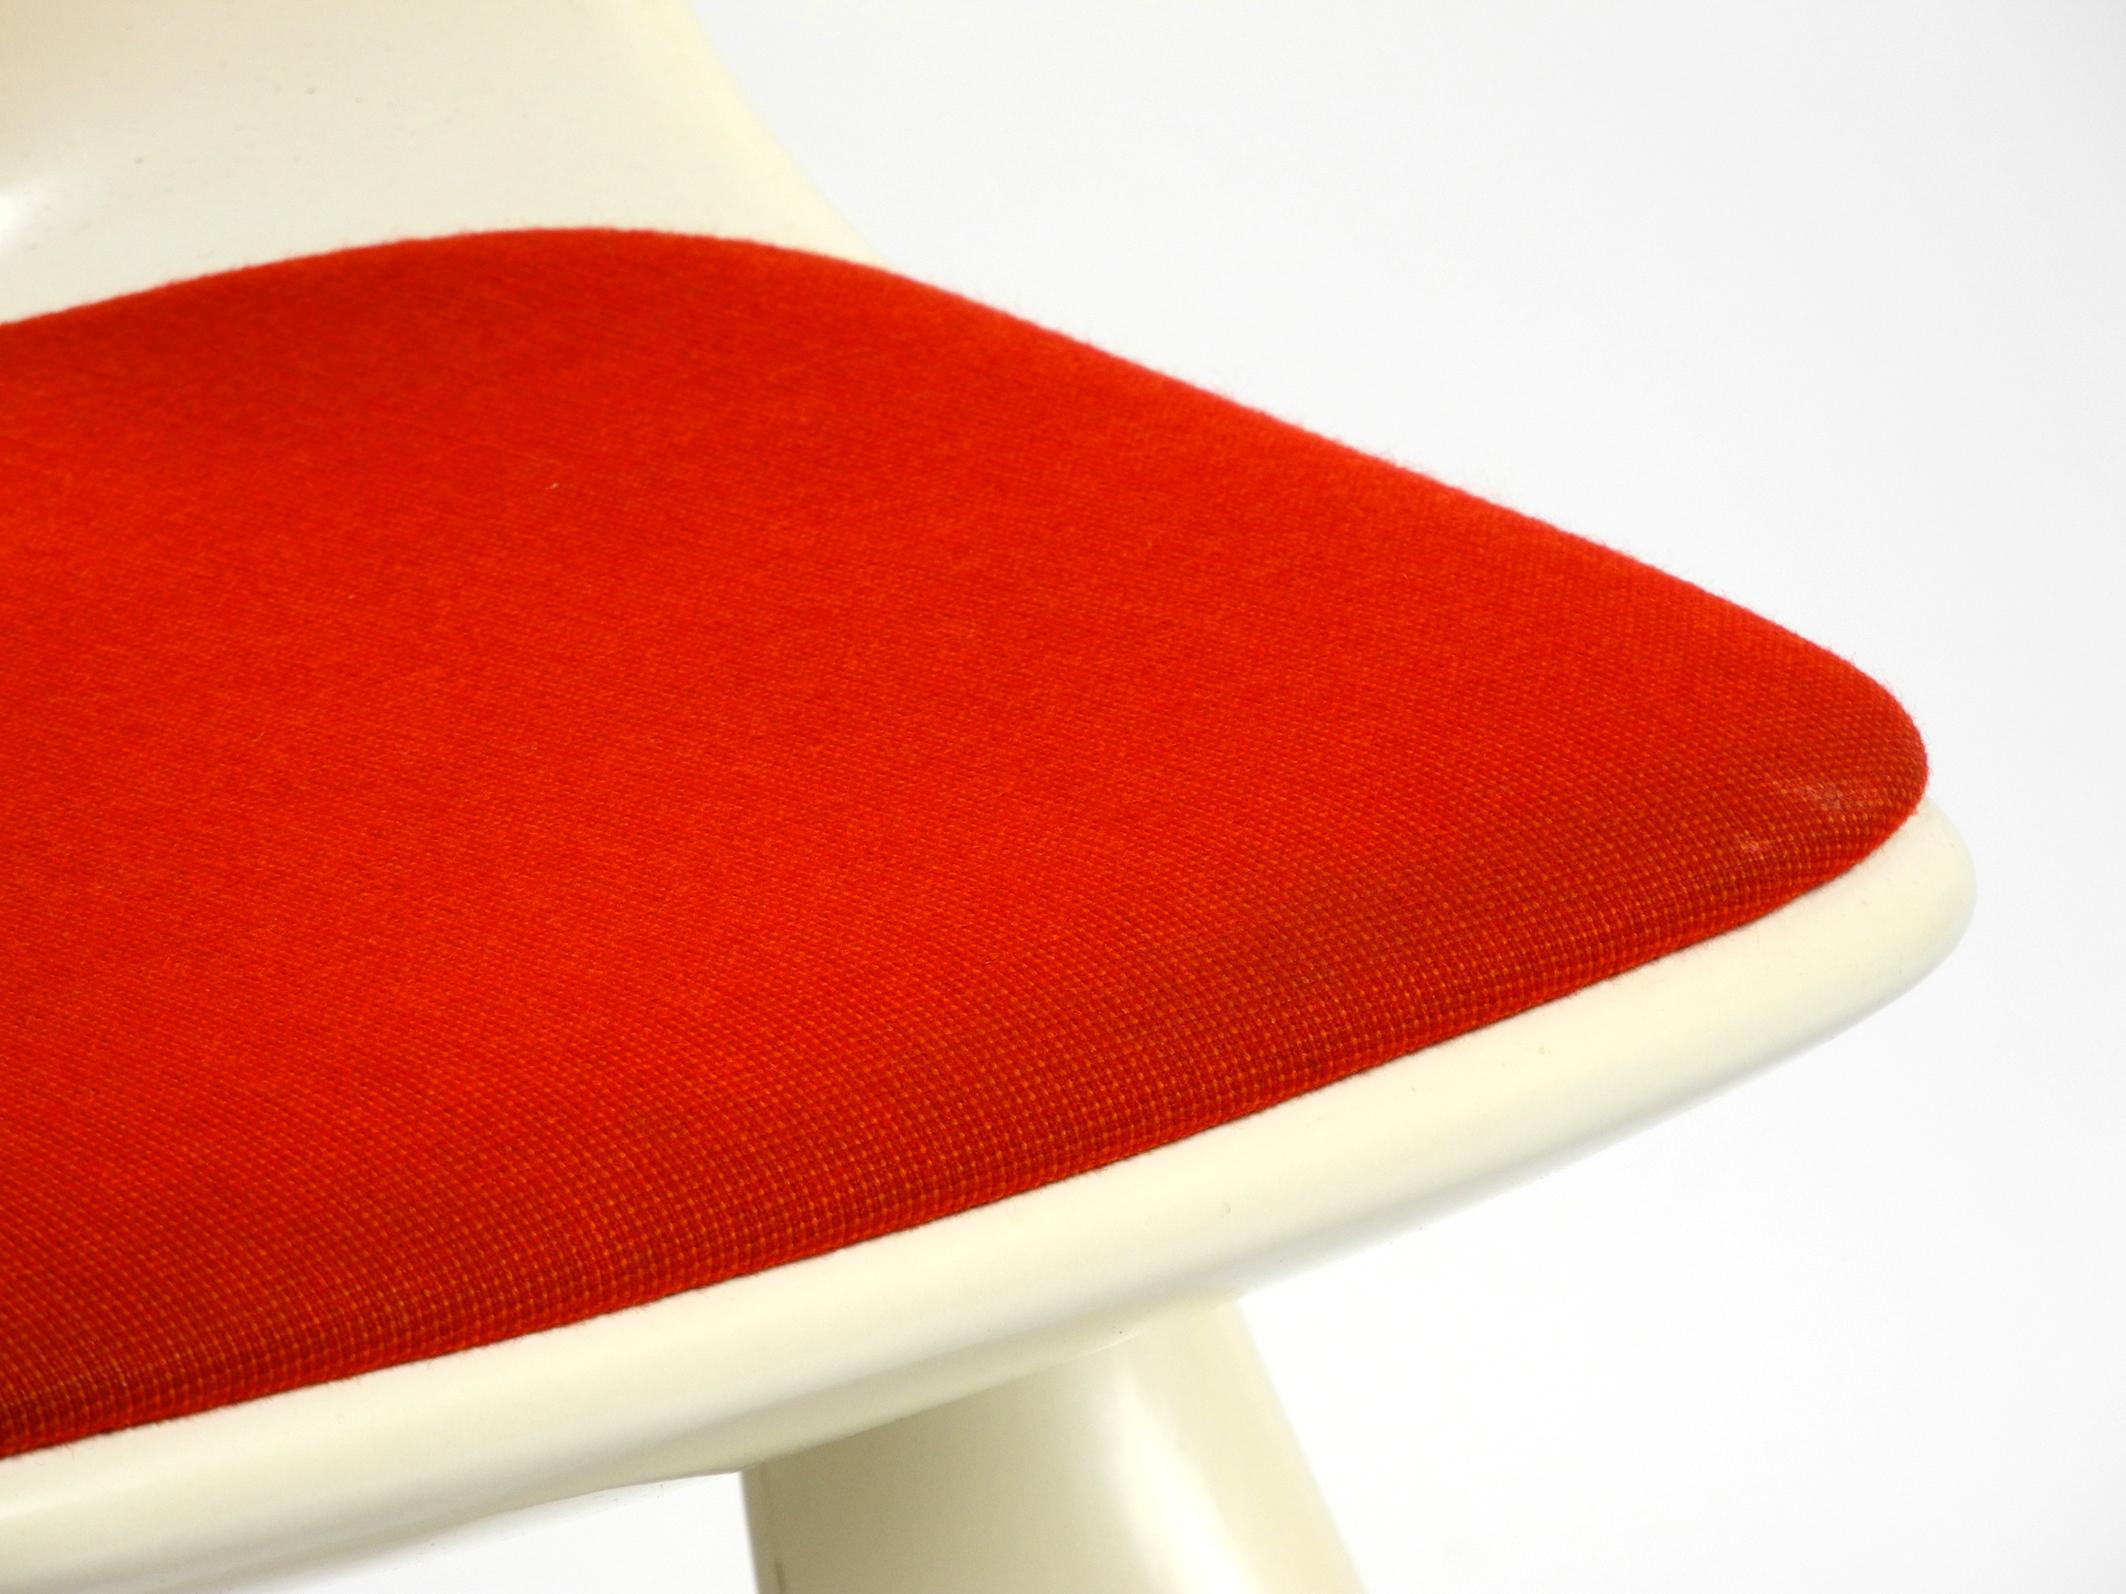 Casala Chair Model 2001/2002 from the 1970s with Original Red Fabric Upholstery 4